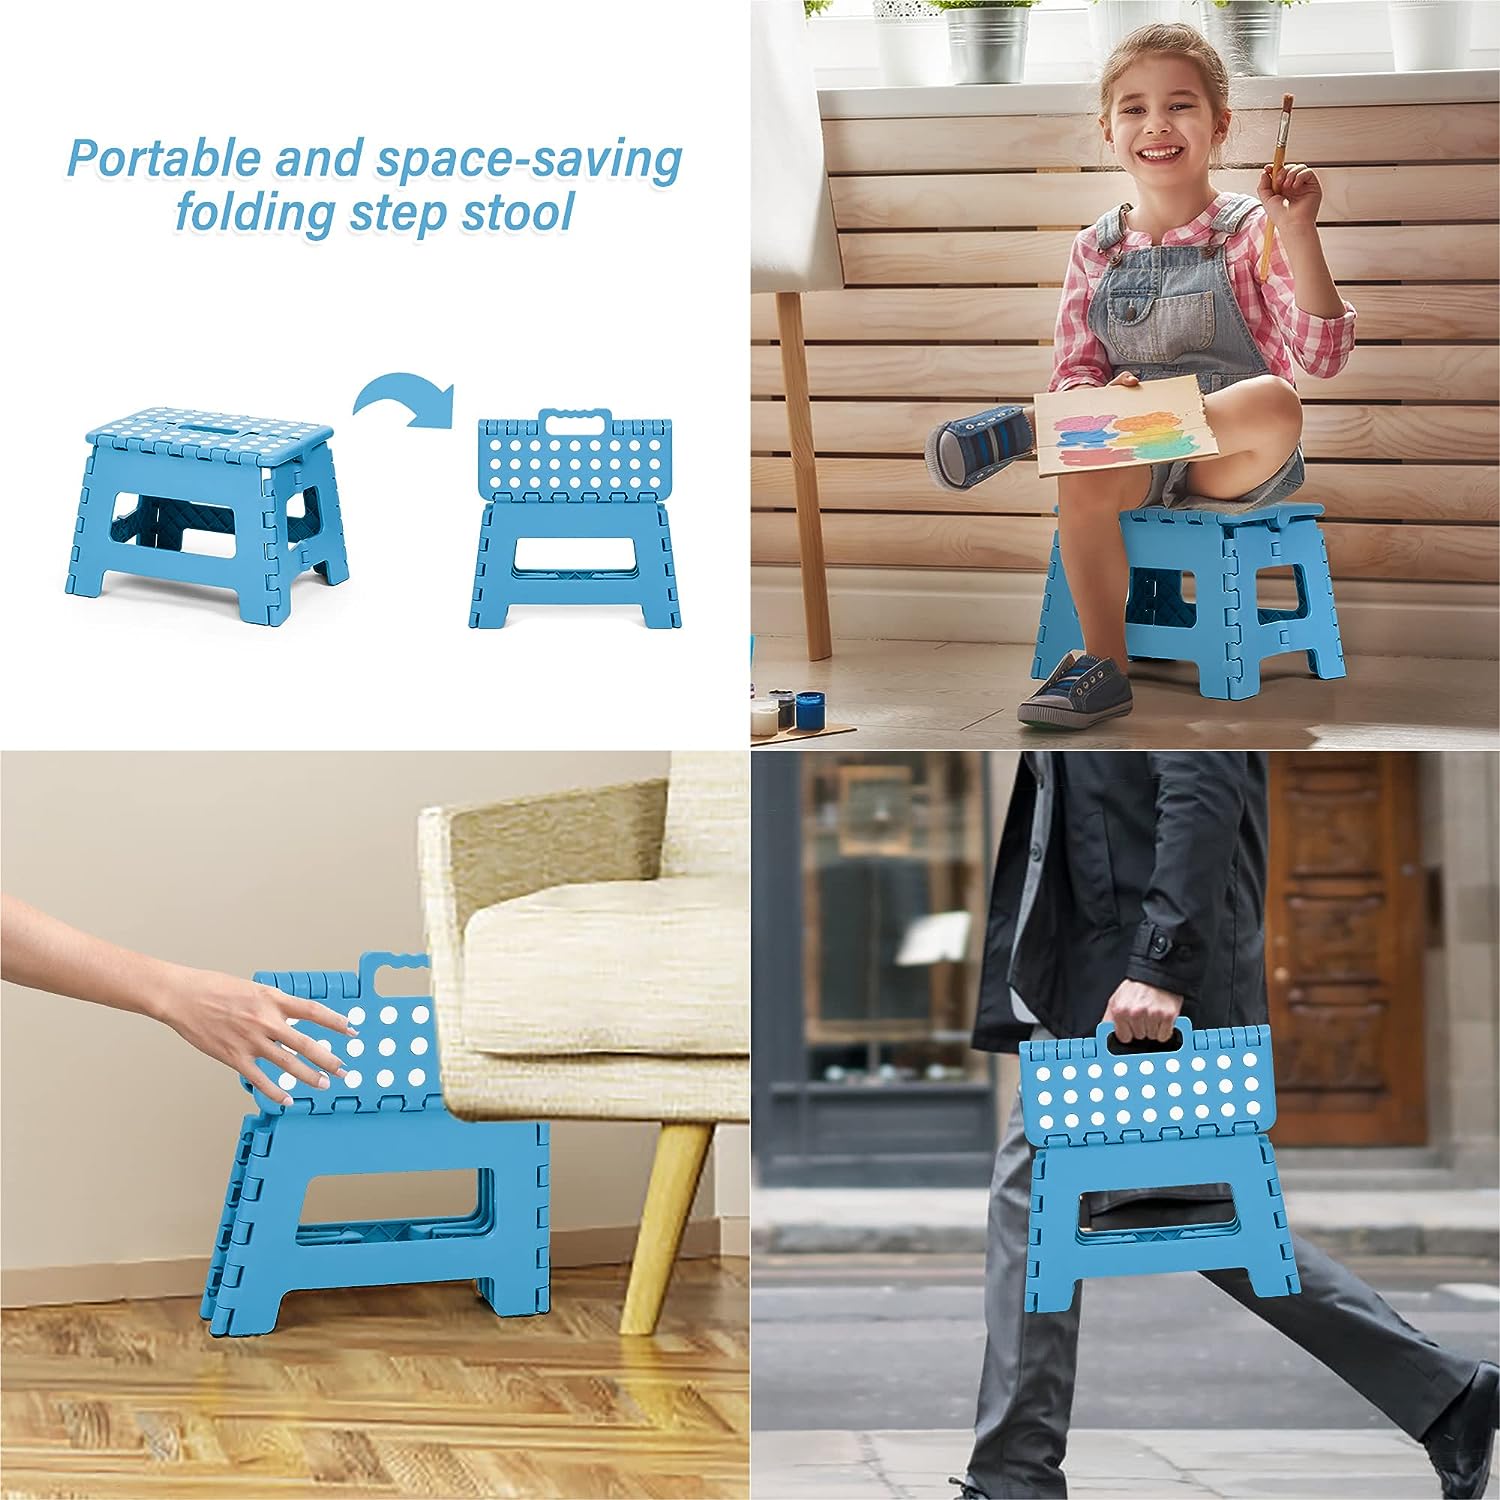 Set of 2 Folding Step Stool 8.7" with Non-Slip Surface and Portable Handle, Blue